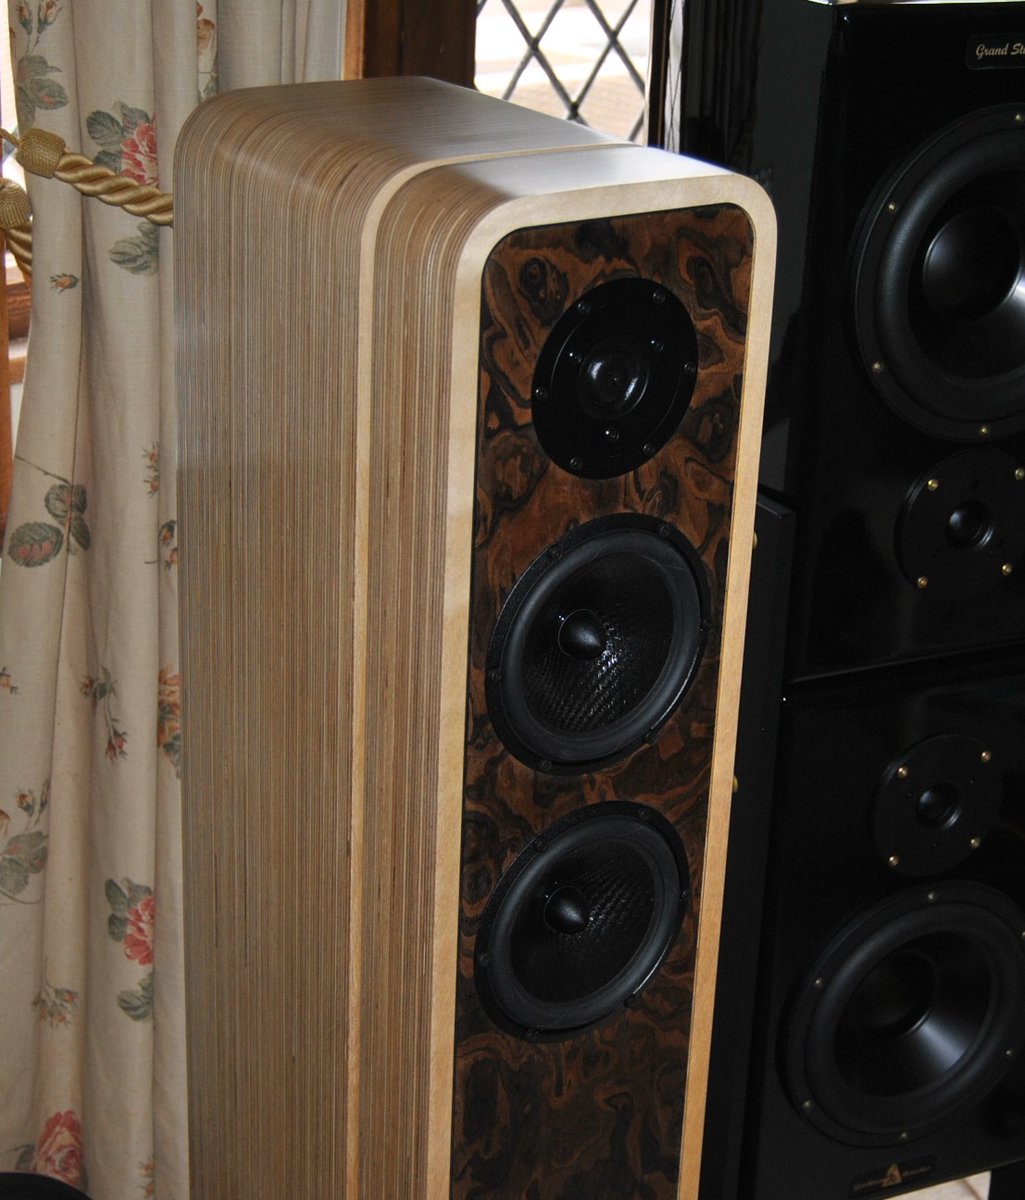 Another first First UK showing of Audel Loudspeakers at The London Audio Show Read the full story here chestergroup.org/the-london-aud…